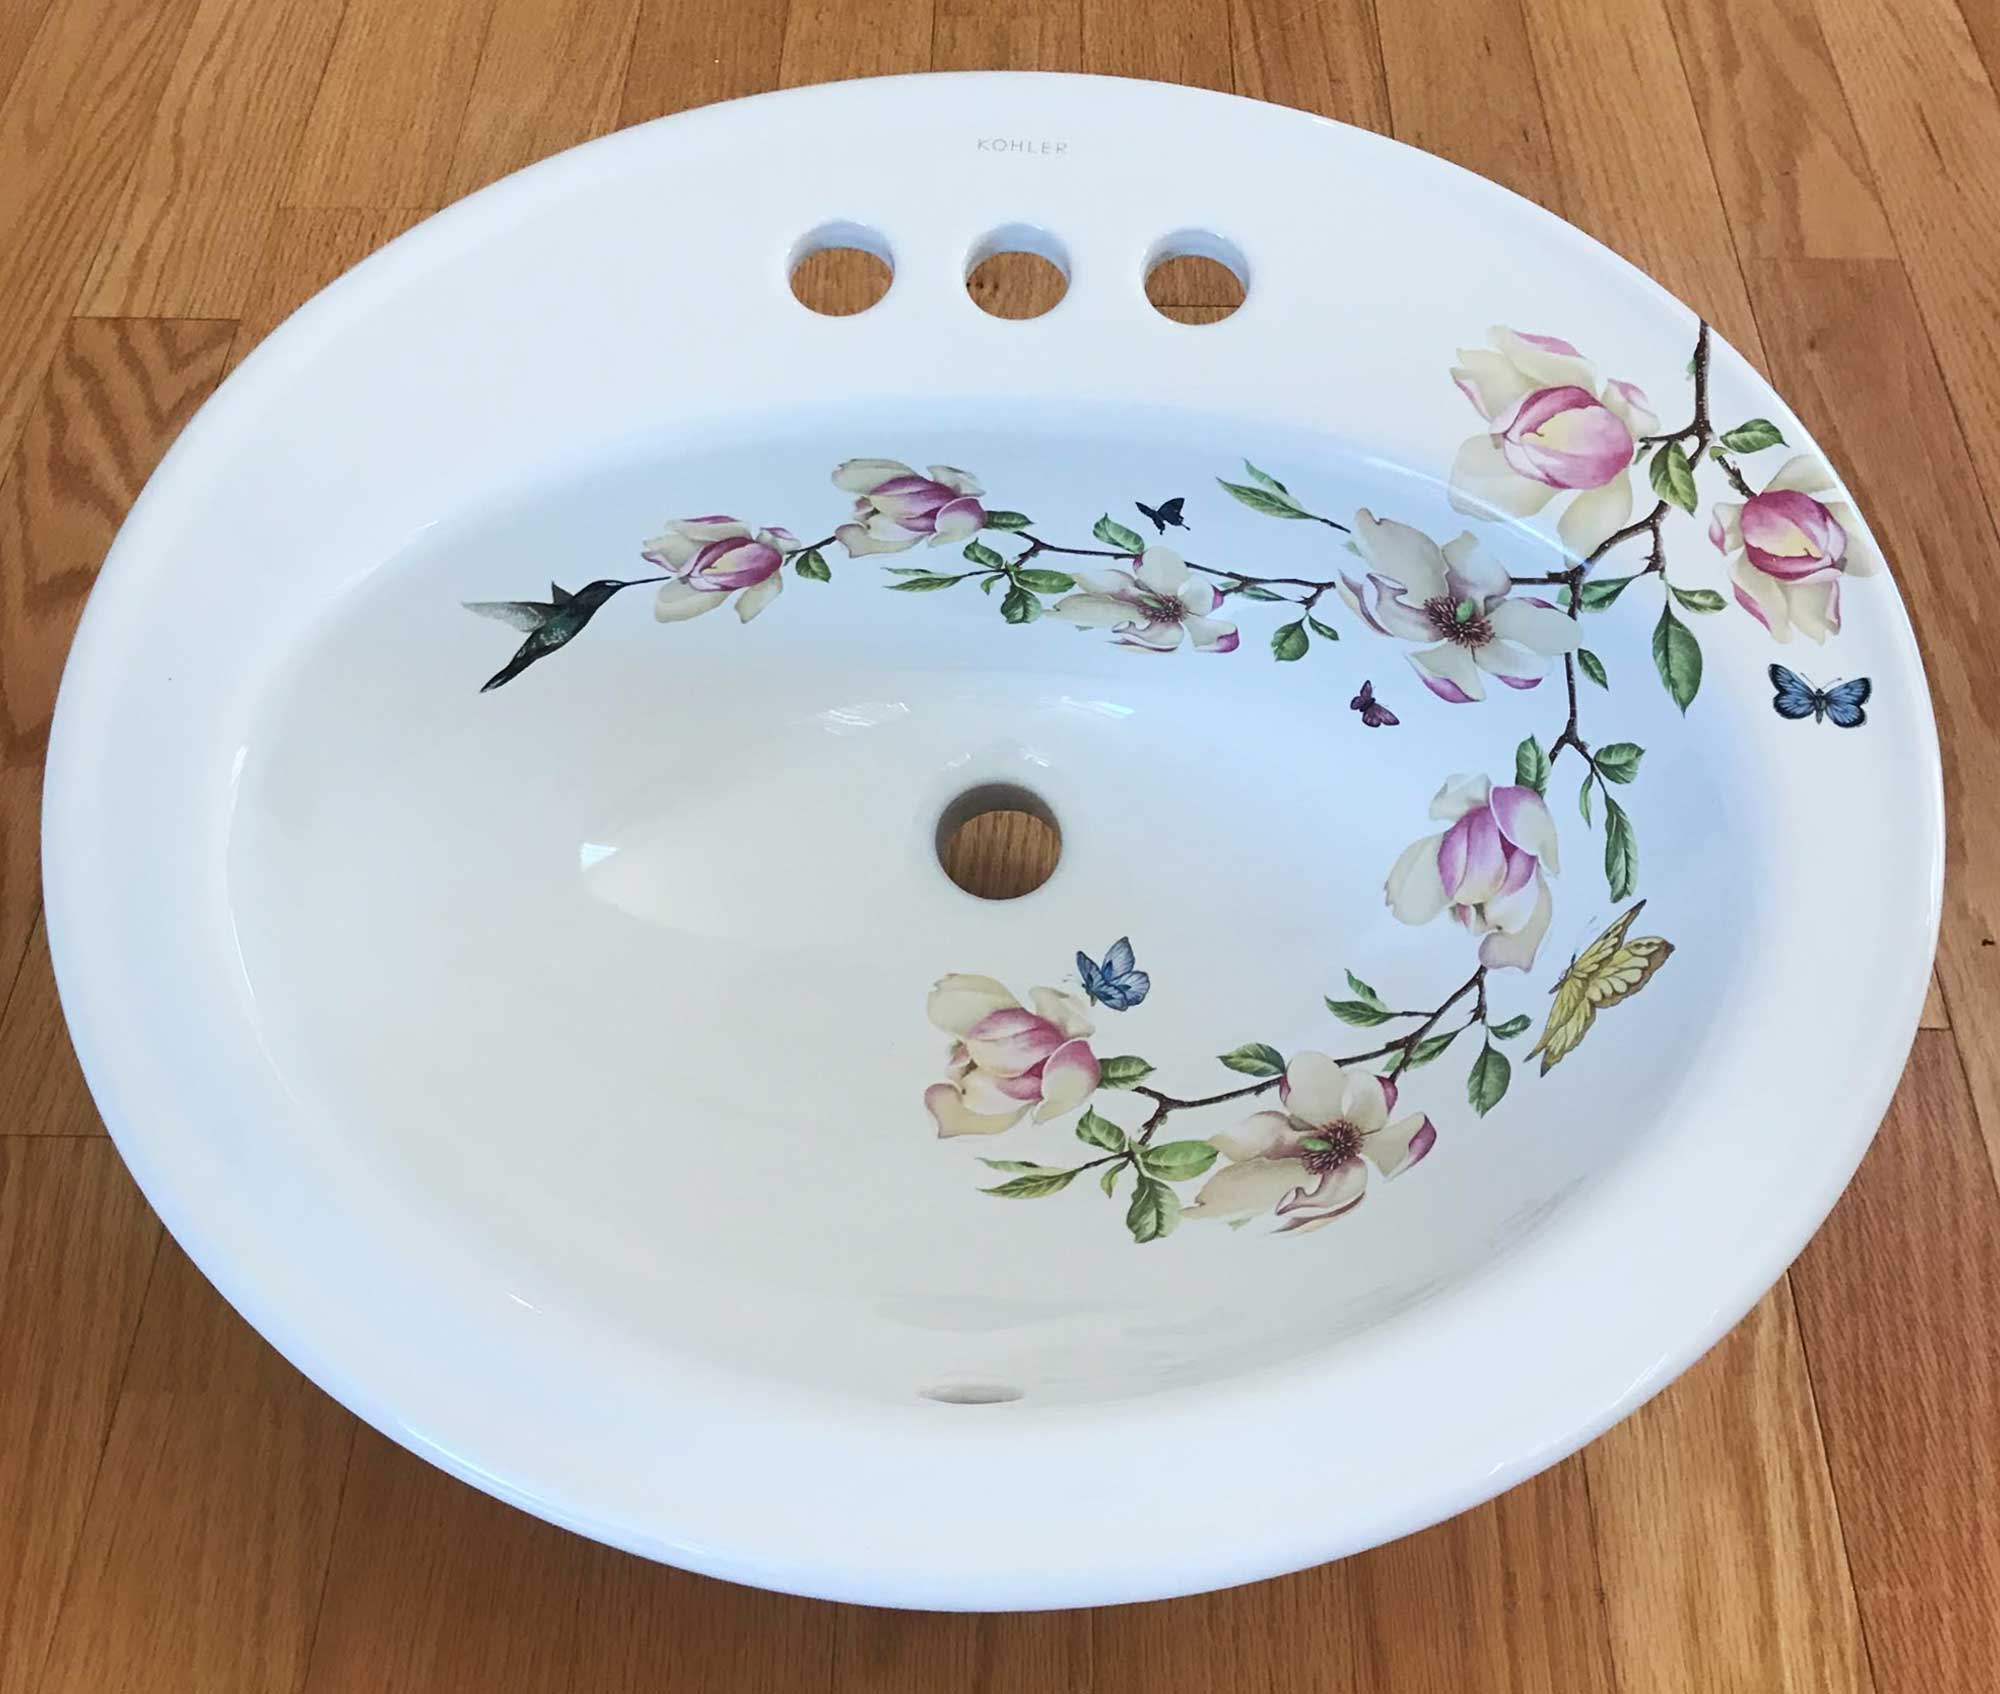 Magnolia Painted Sink | It’s All about Customer Satisfaction!